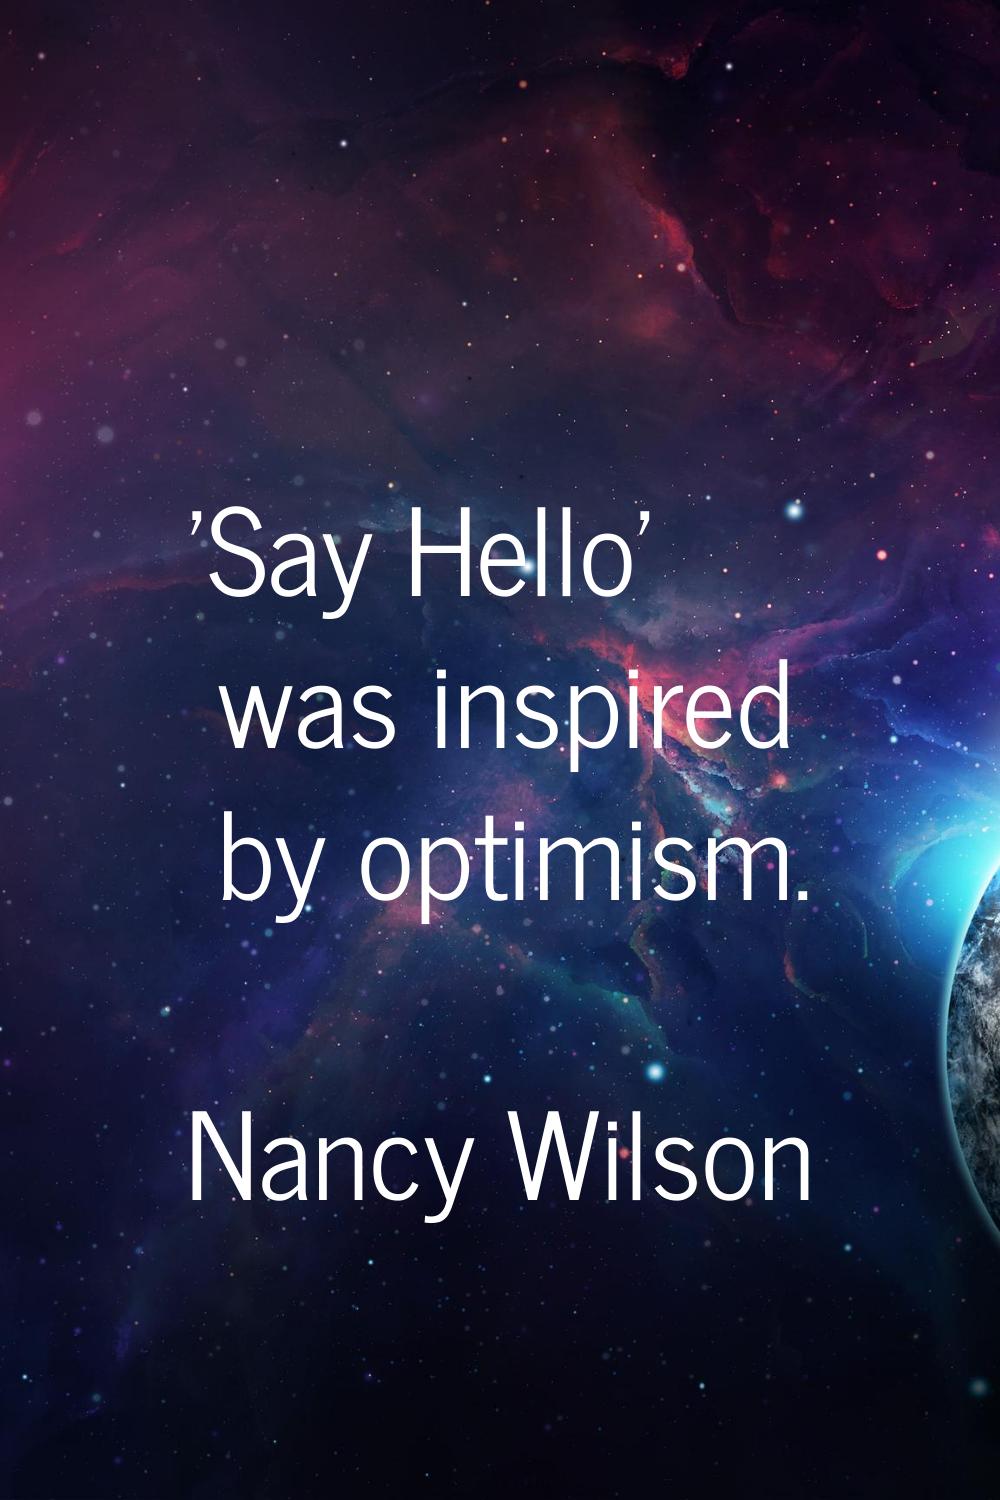 'Say Hello' was inspired by optimism.